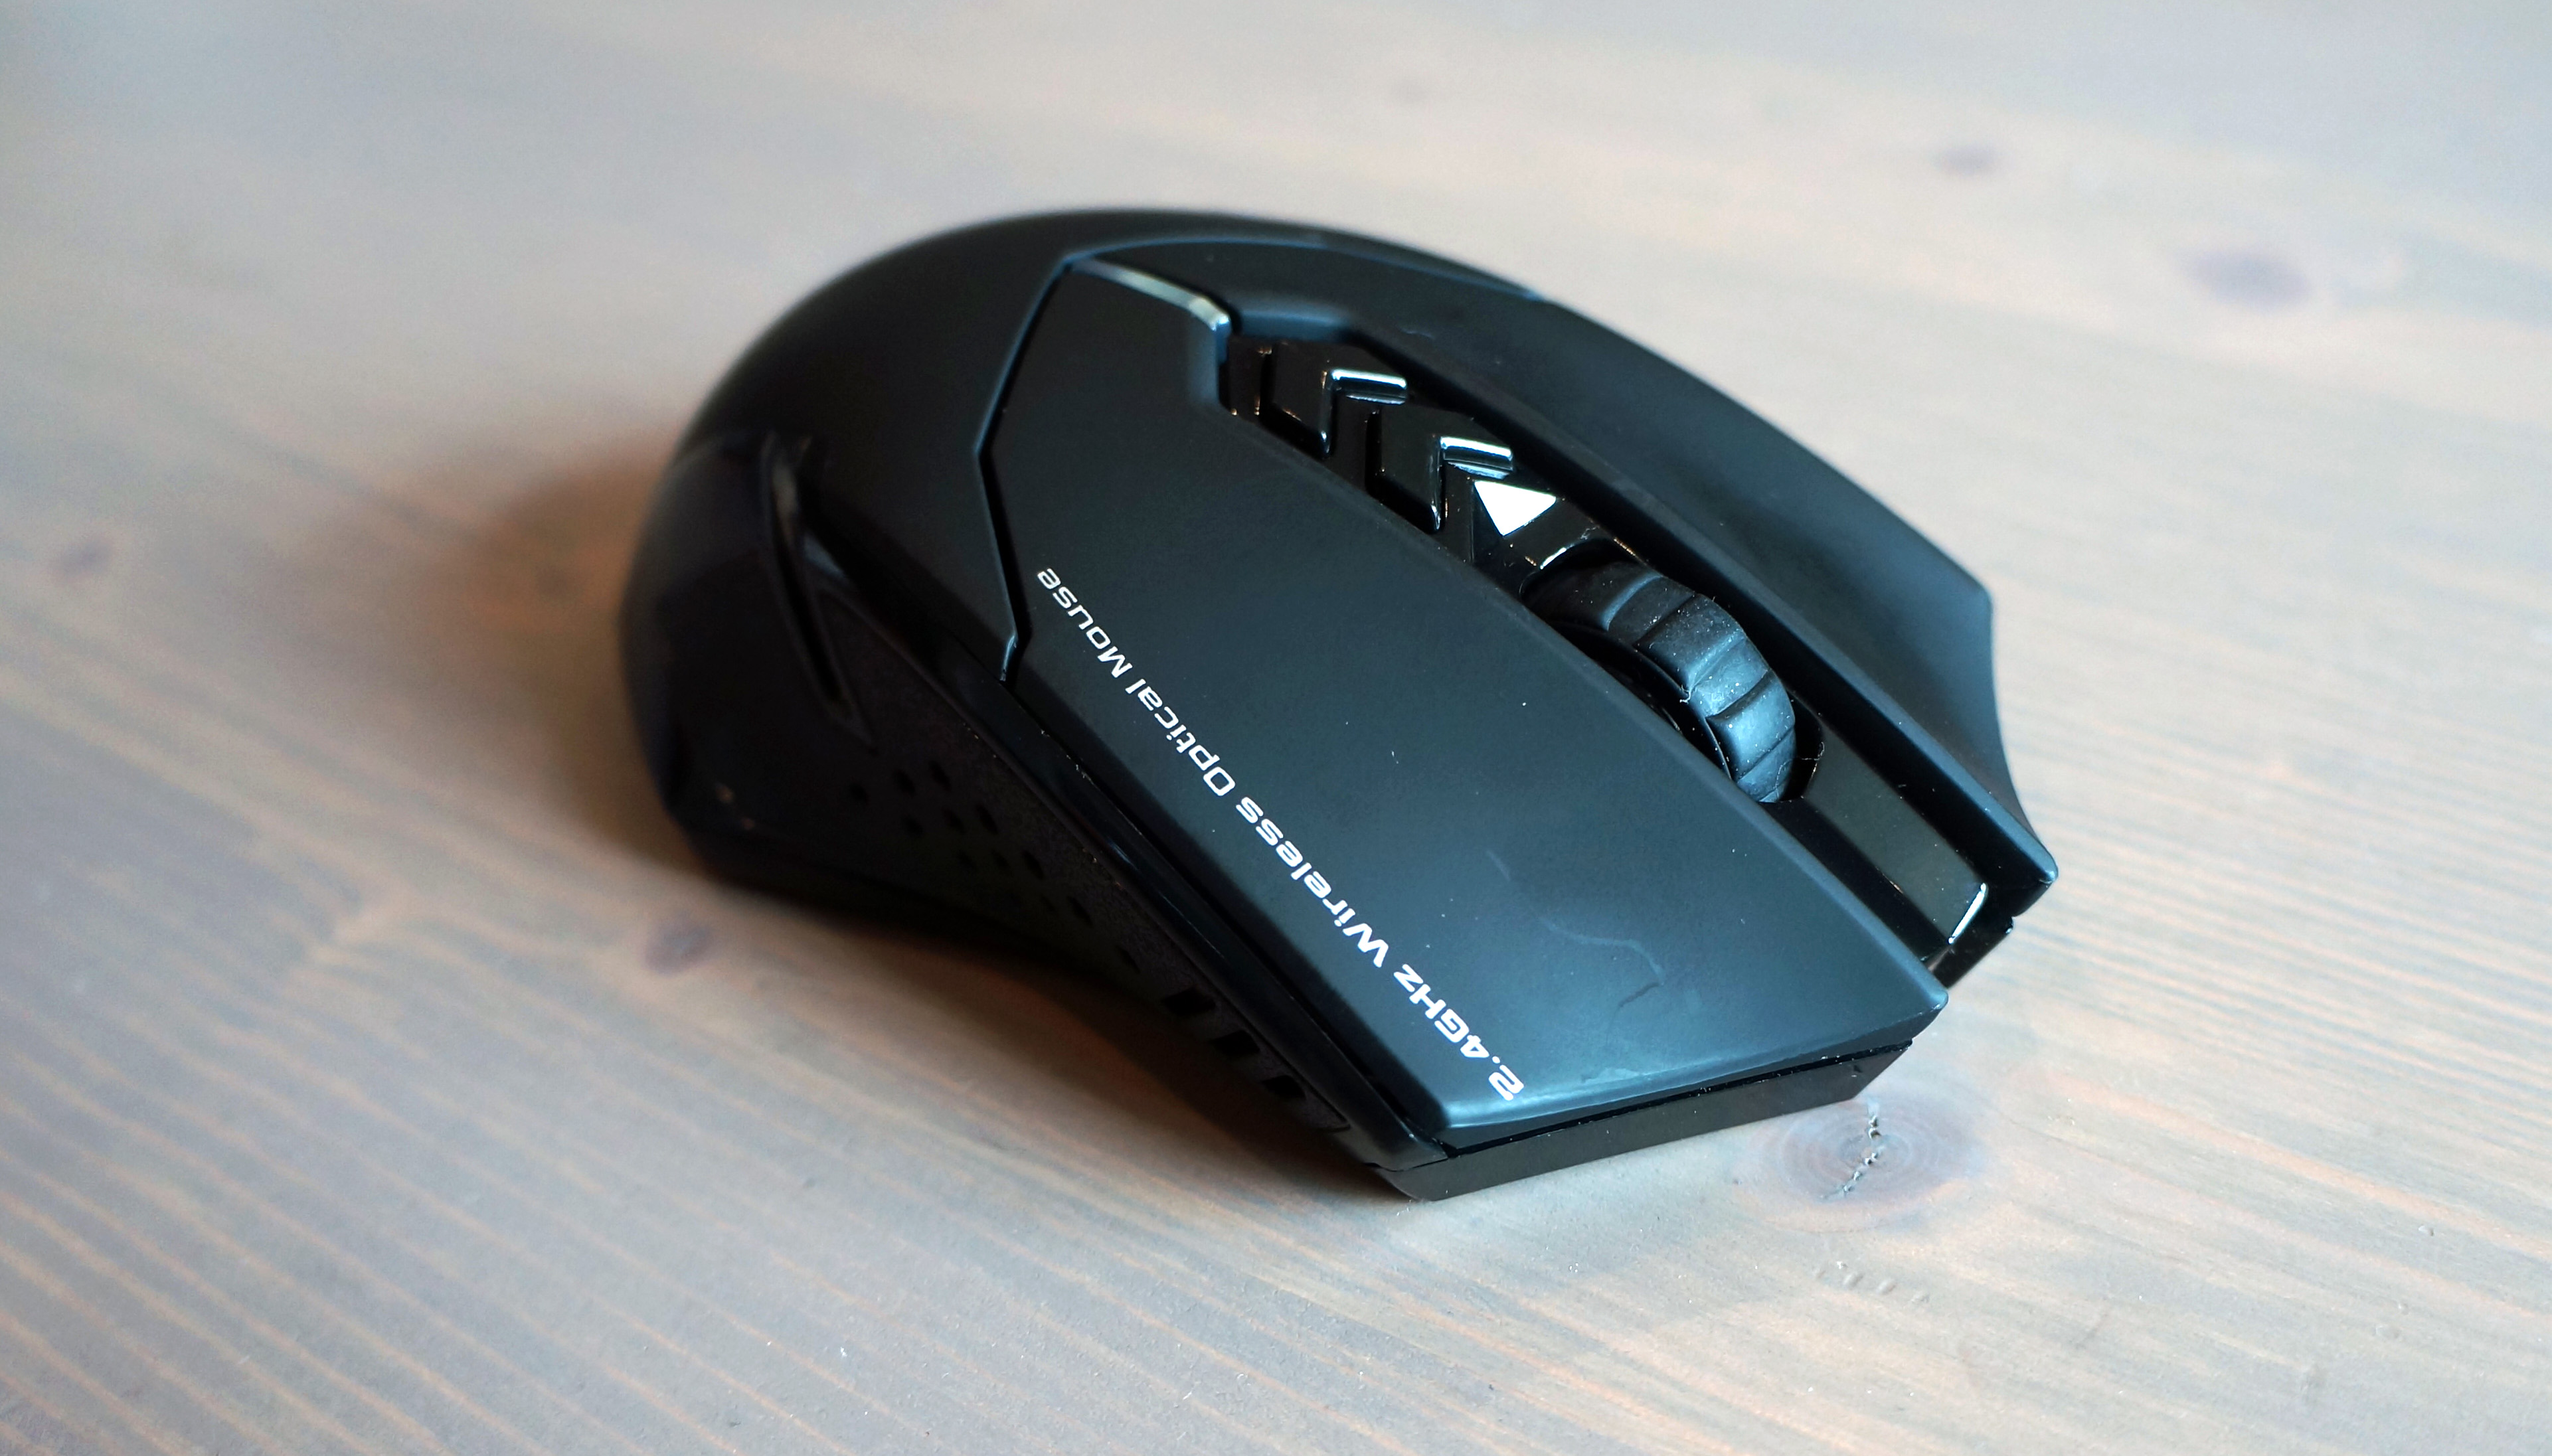 pictek gaming mouse turns red battery